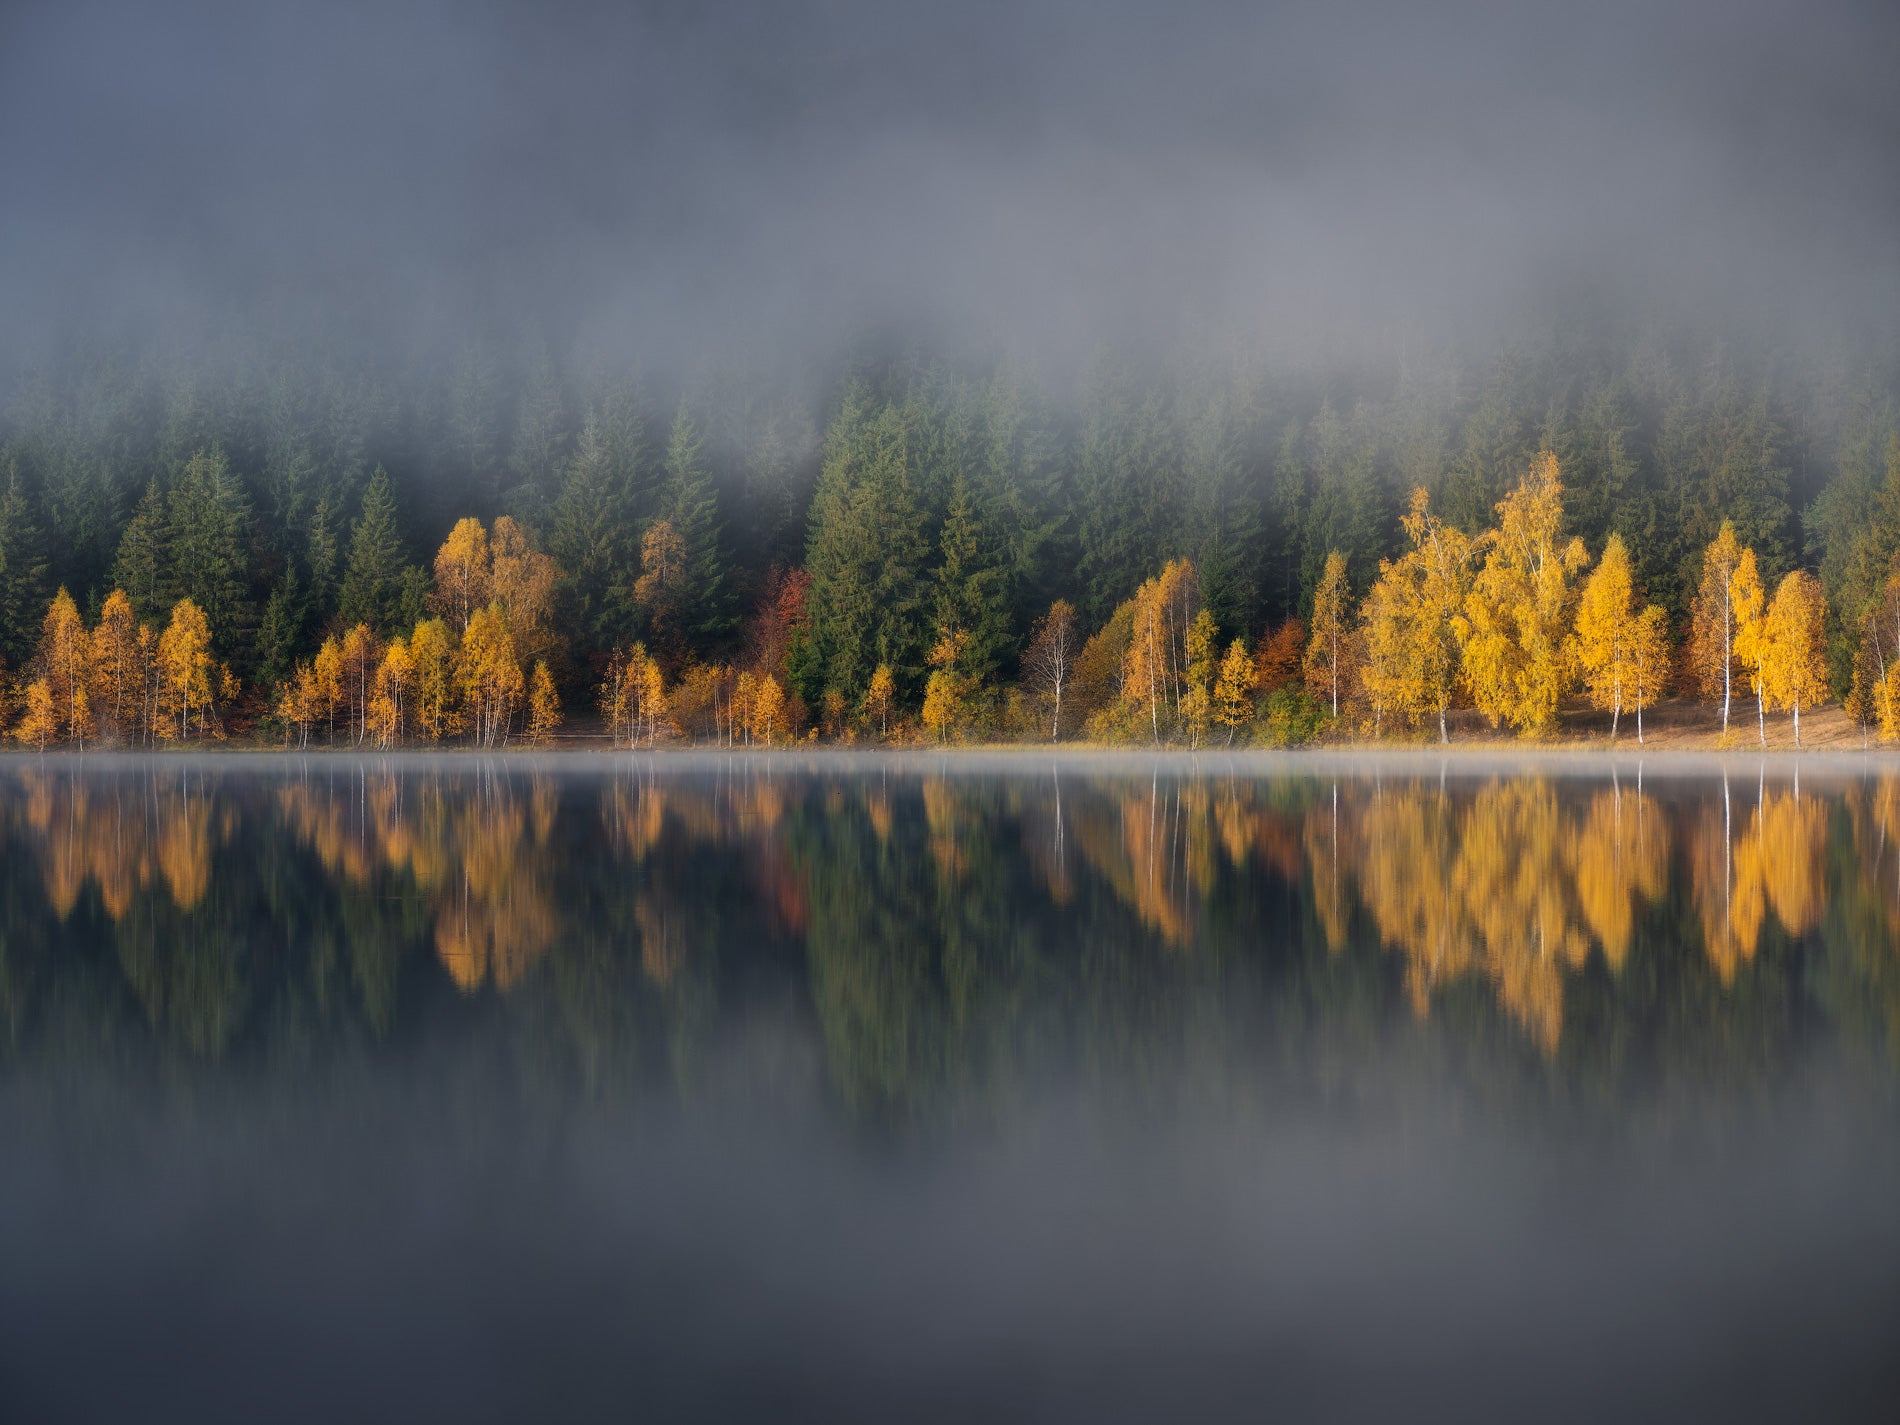 Forests Through the Fog featured opacity image